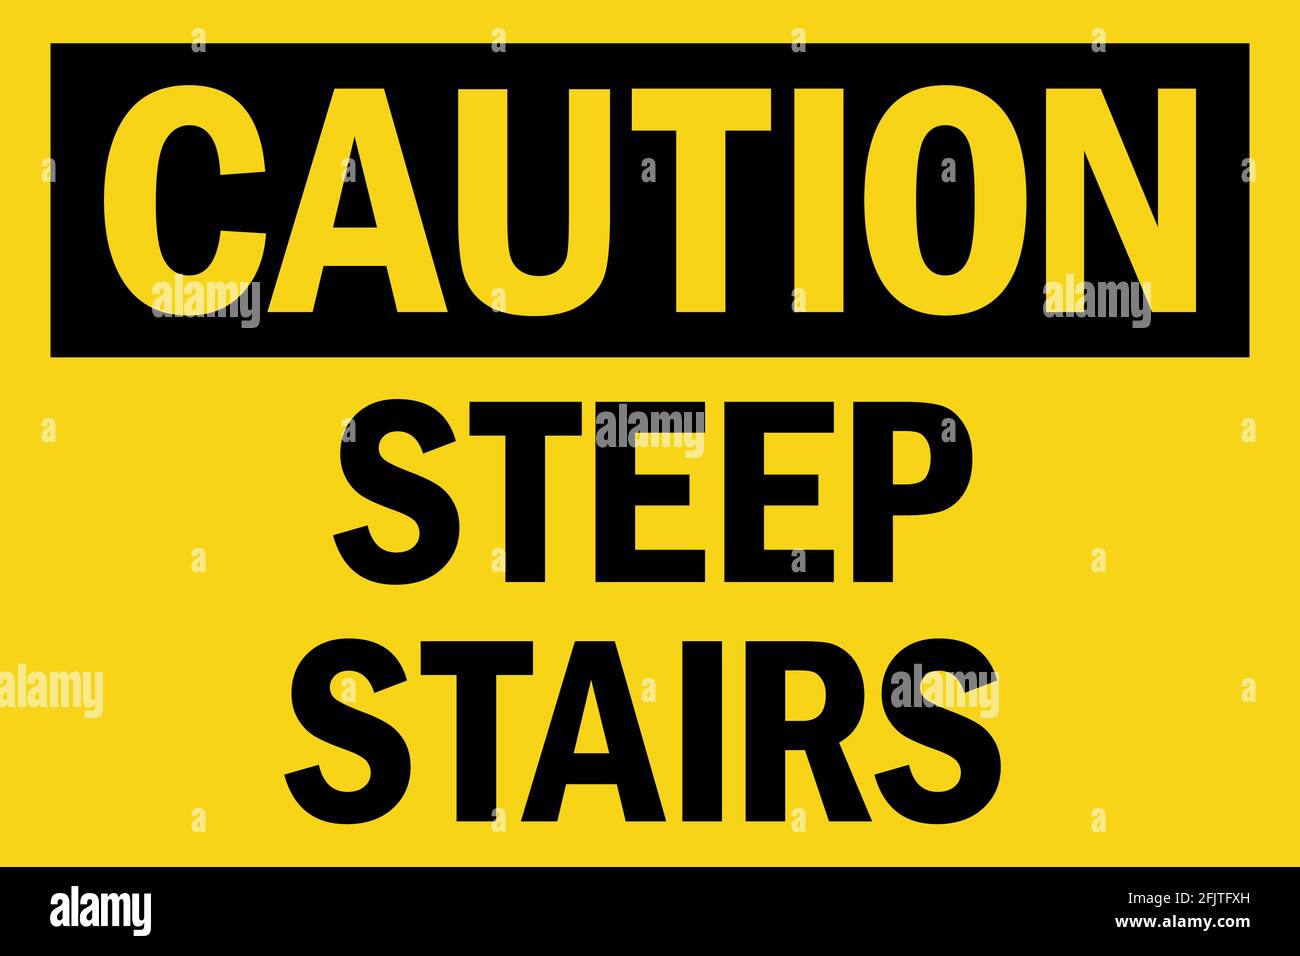 Caution steep stairs sign. Black on yellow background. Safety signs and symbols. Stock Vector